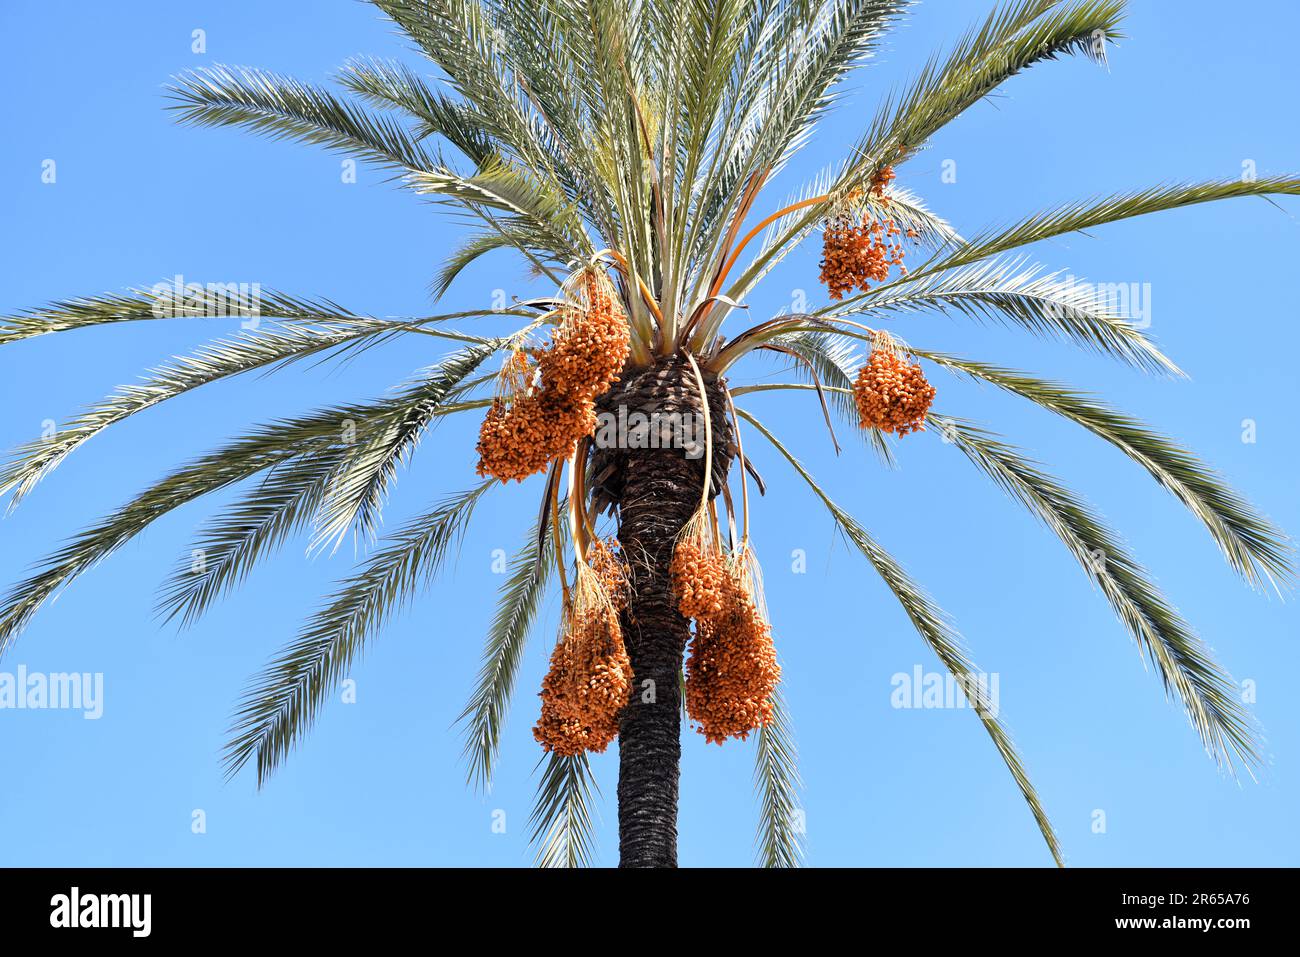 Closeup of a Date Palm with fruit hanging in bunches against a blue sky. Stock Photo